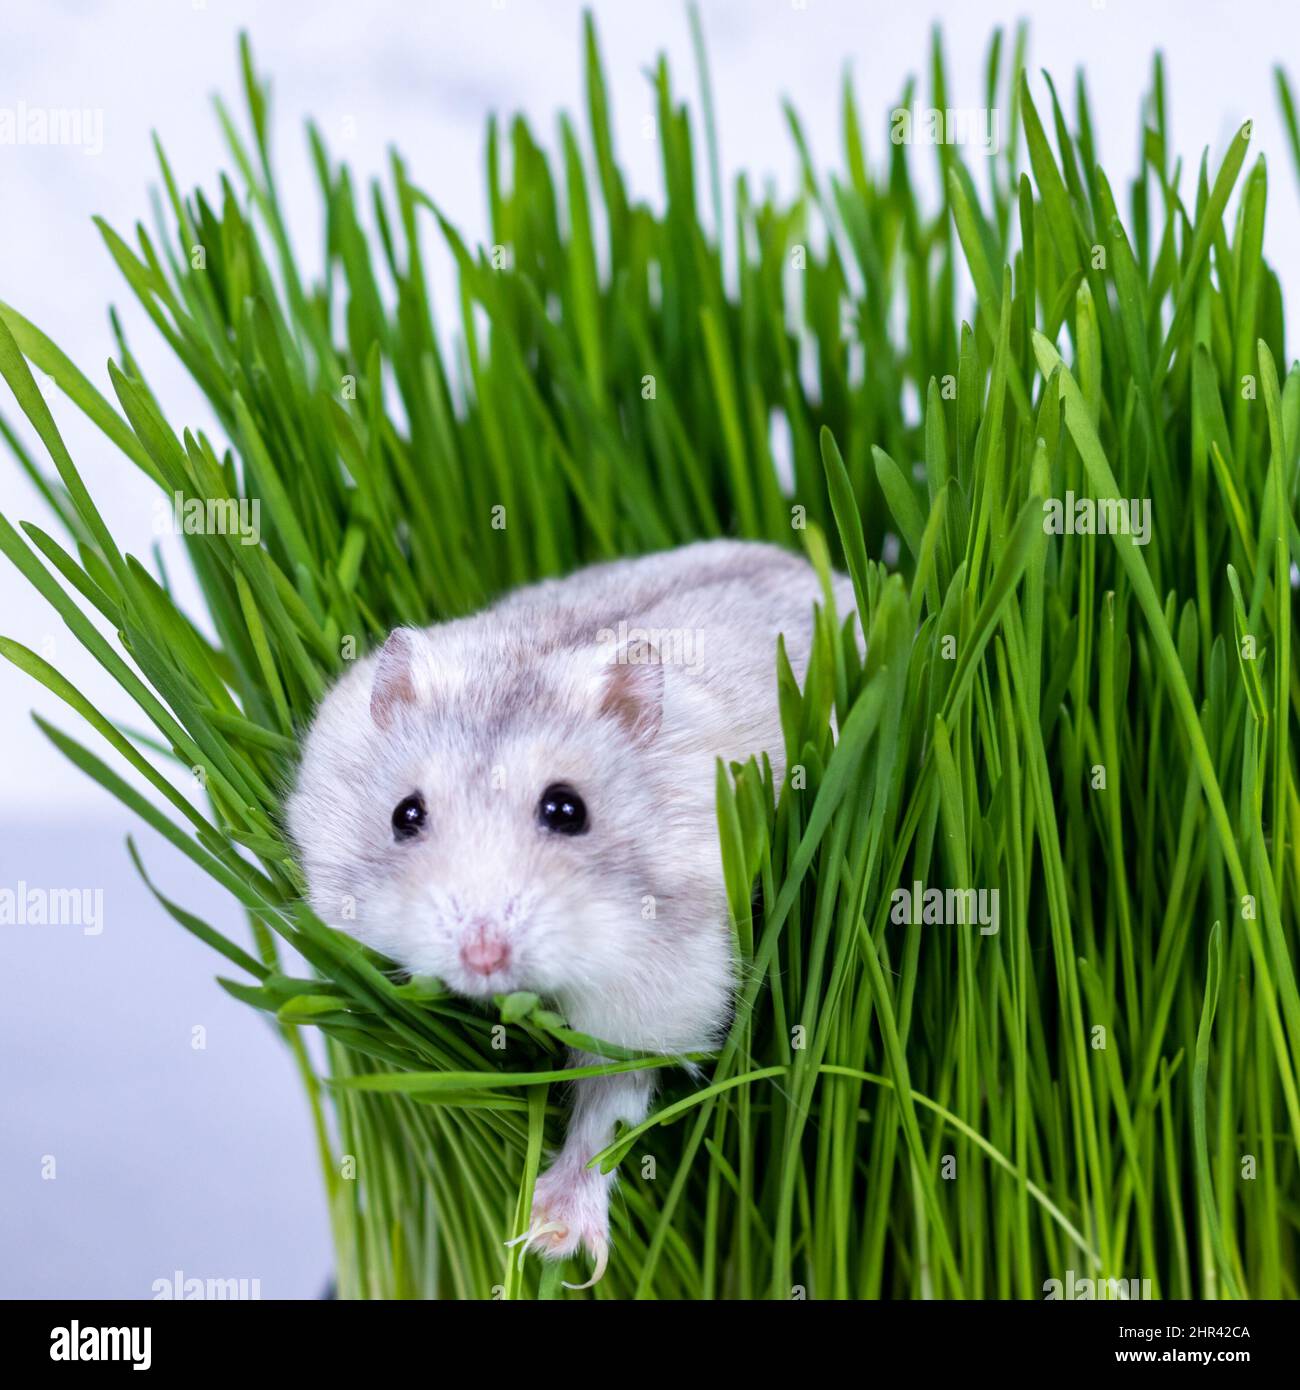 Djungarian hamster sits in green grass close-up. Stock Photo